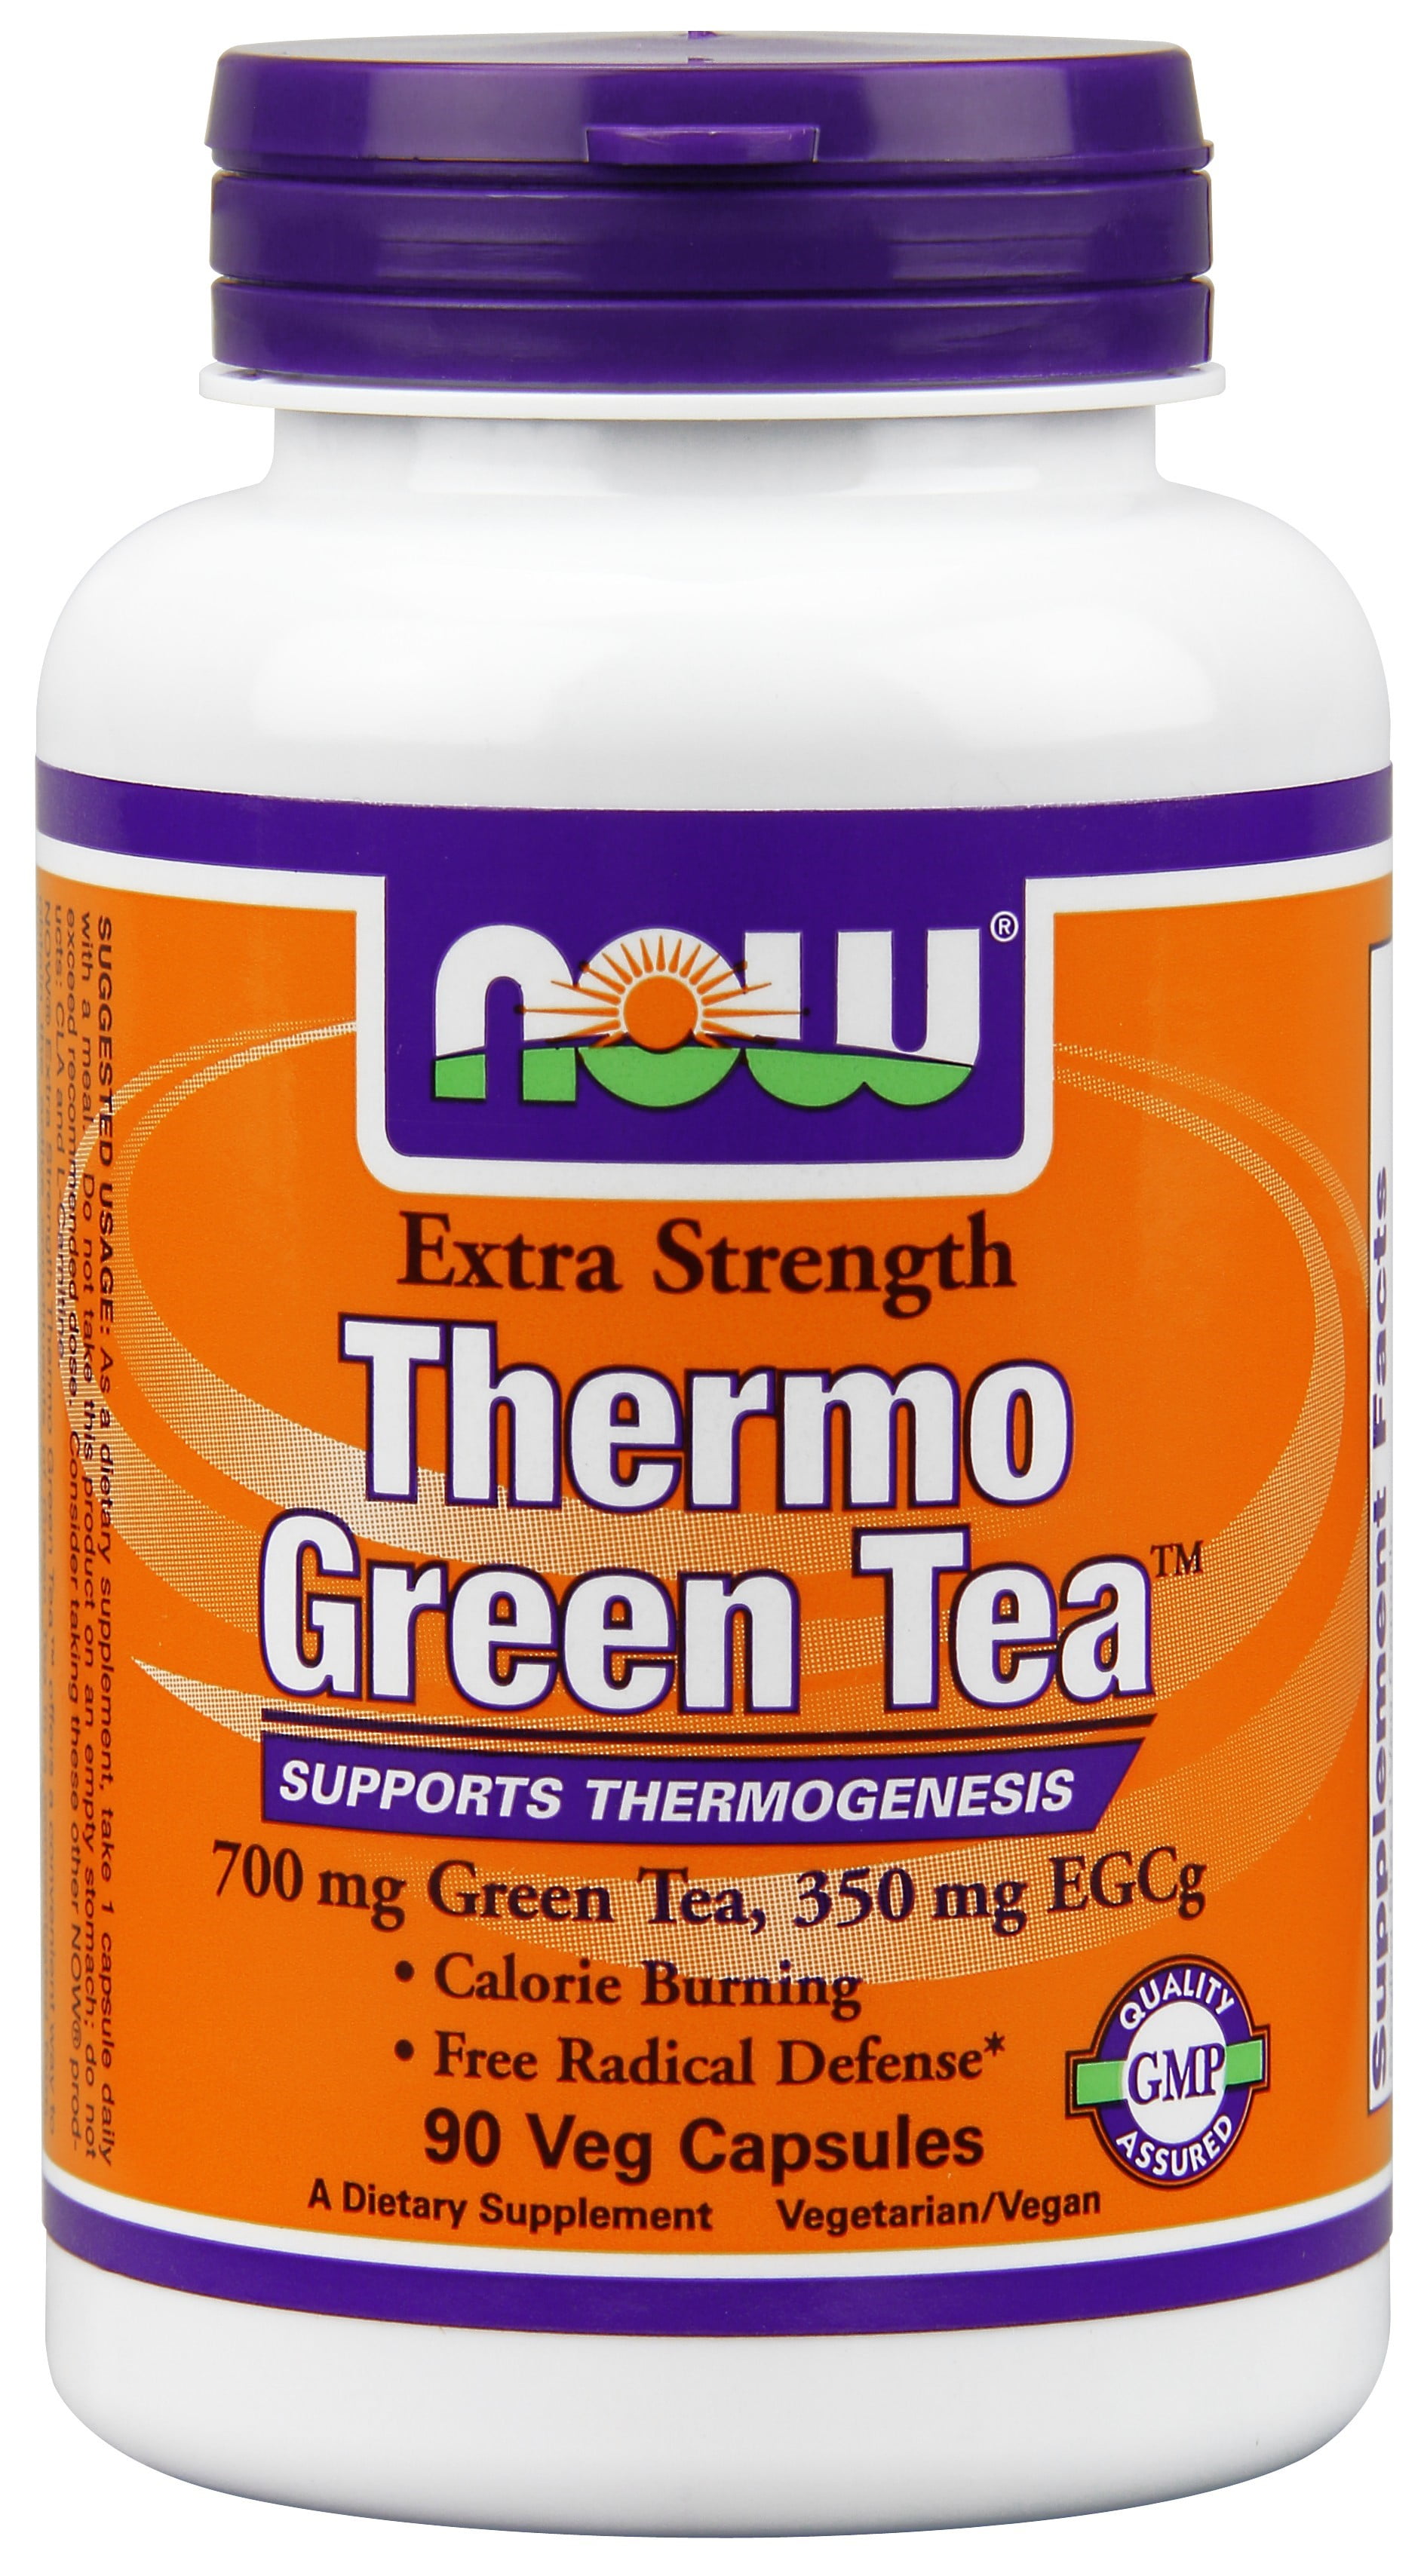 NOW Supplements, Thermo Green Tea™, Extra Strength, with 700 mg Green Tea  and 350 mg EGCg, 90 Veg Capsules (Pack of 3)